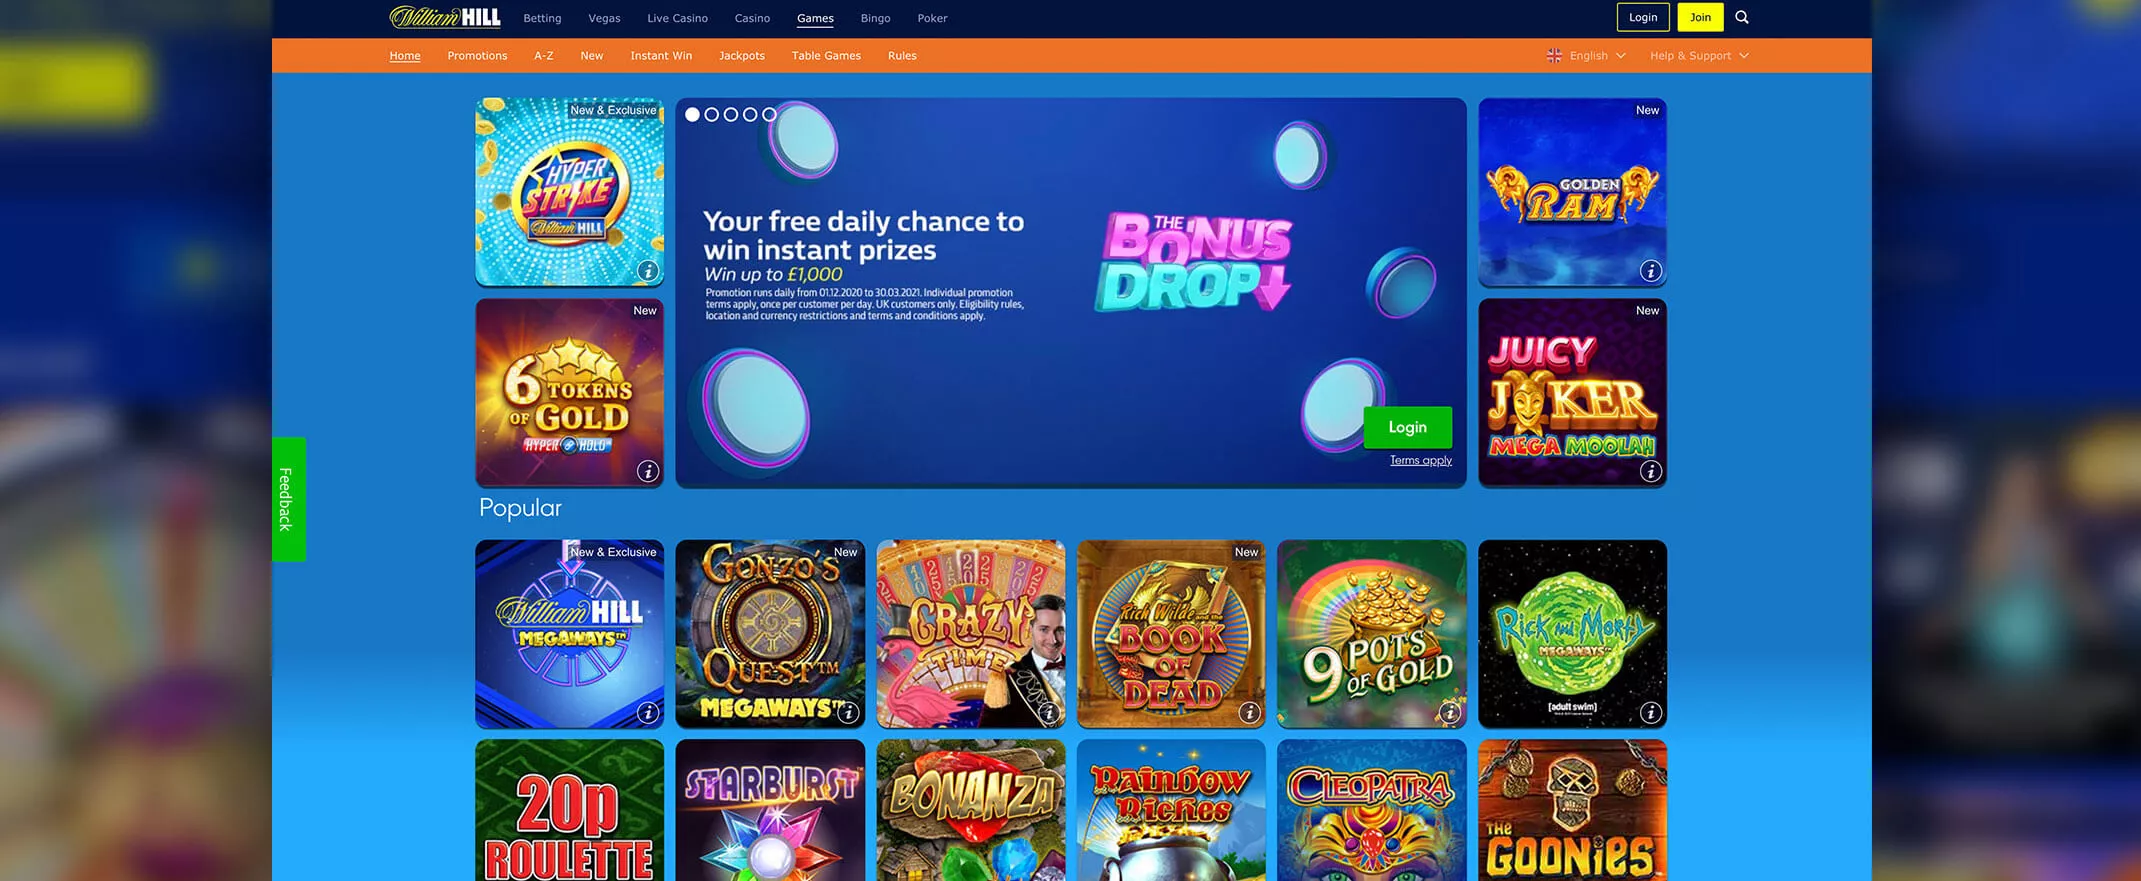 William Hill screenshot of the games